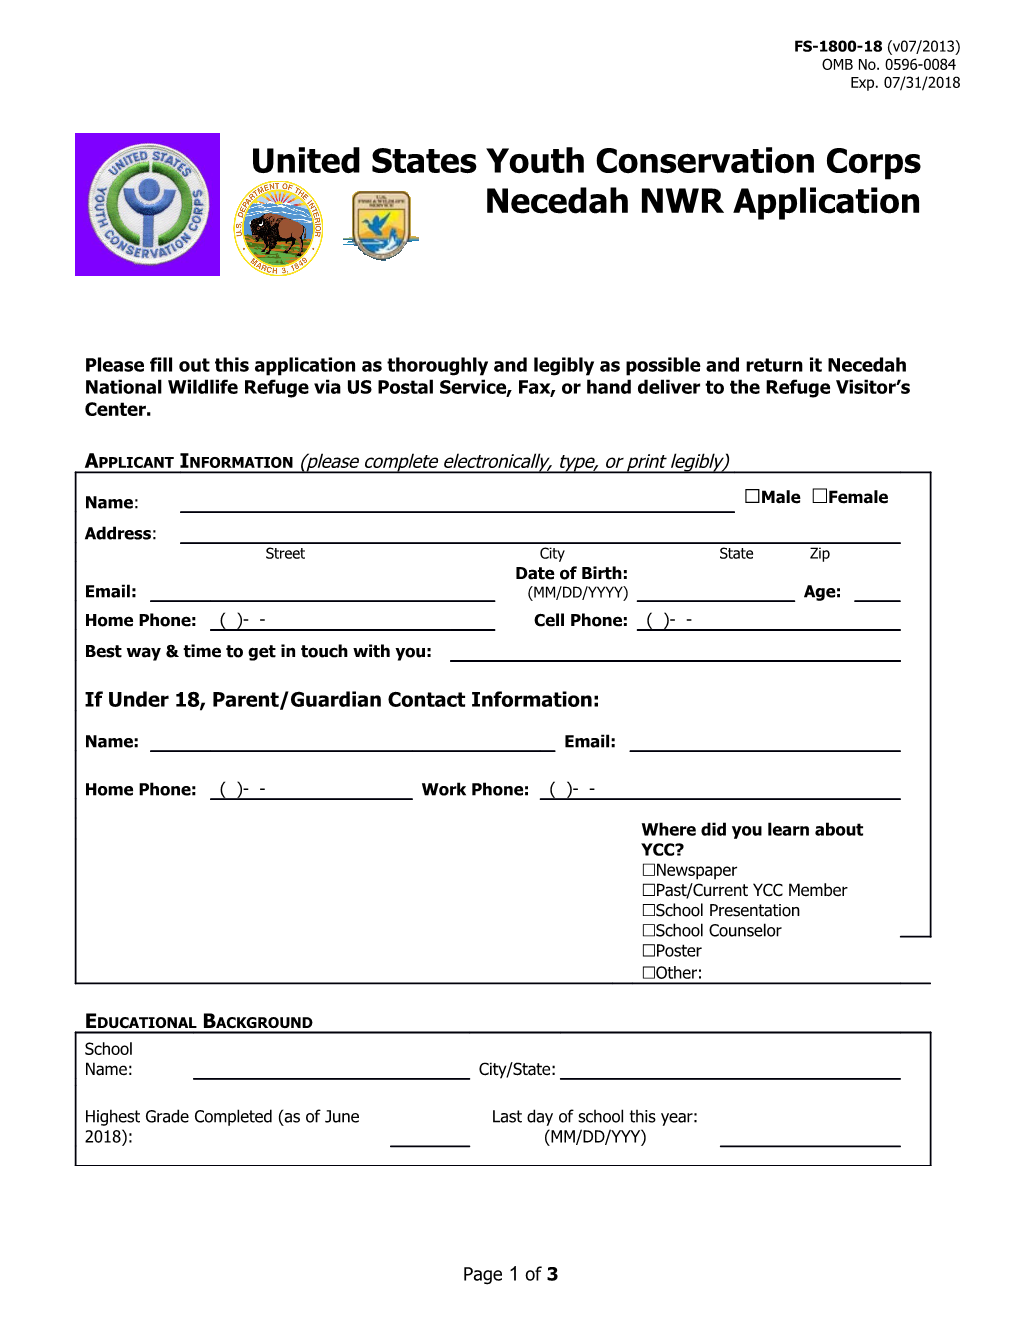 Send Your Completed Application to Necedah National Wildlife Refuge By